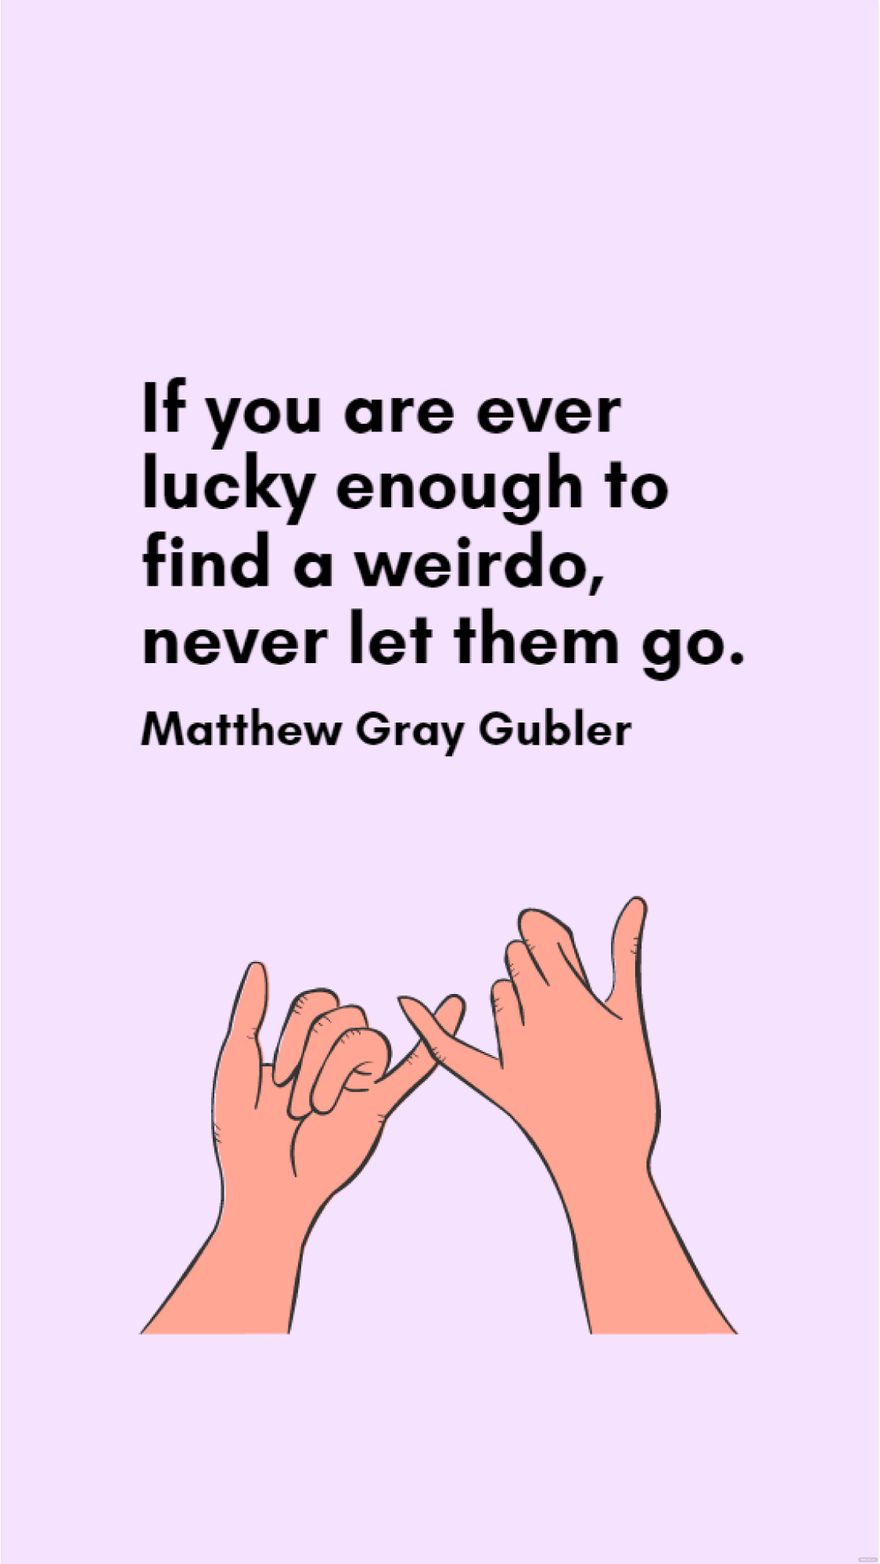 Matthew Gray Gubler - If you are ever lucky enough to find a weirdo, never let them go.